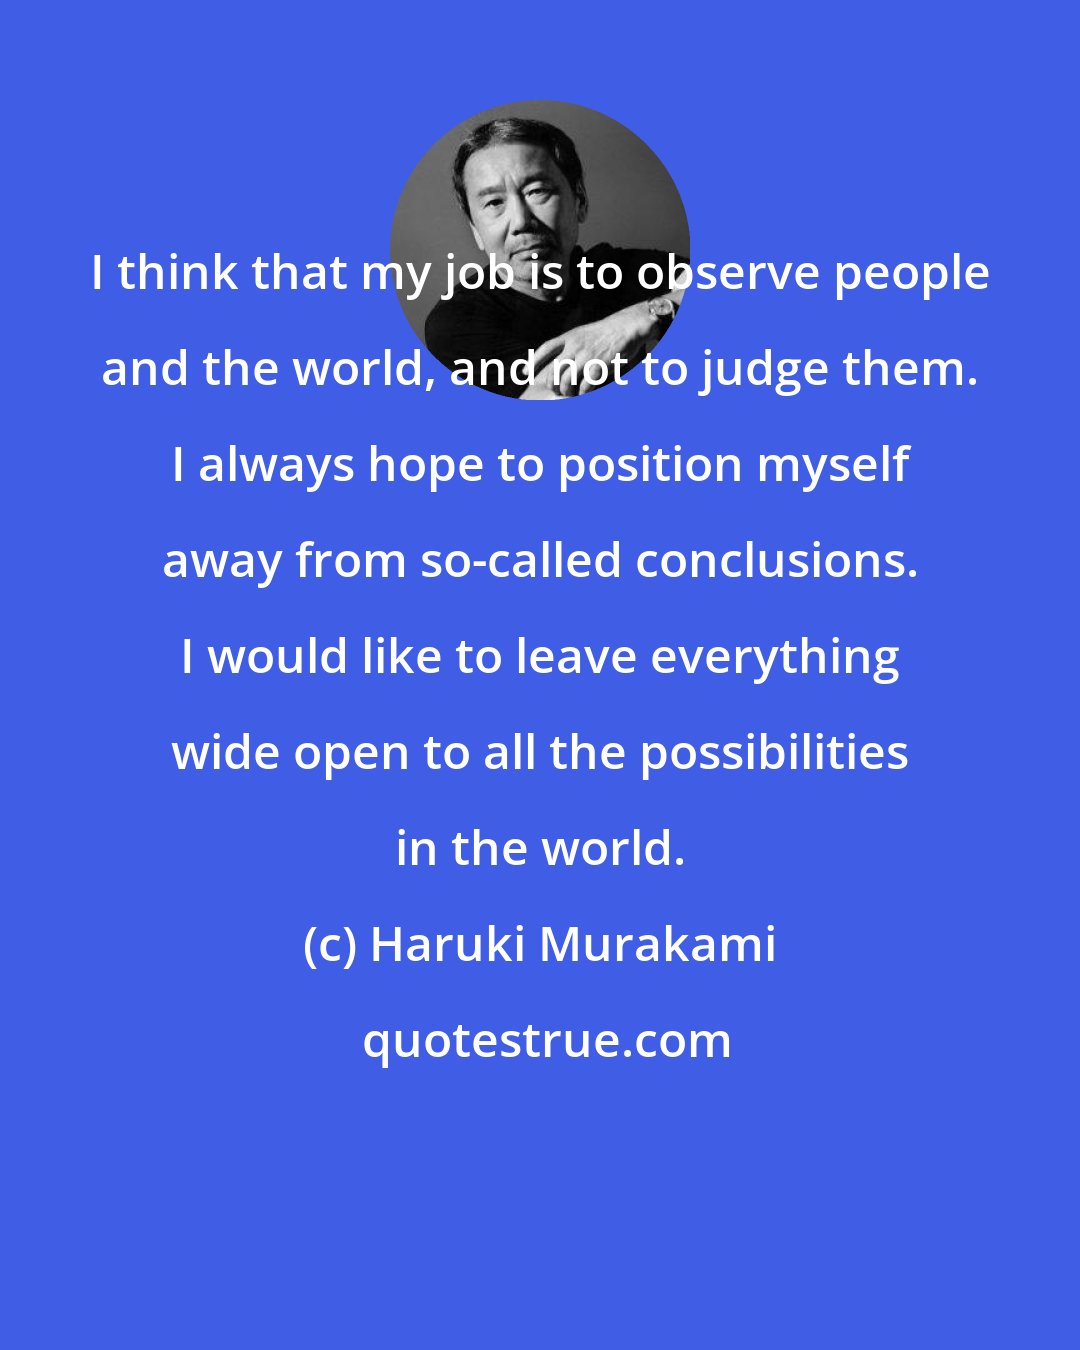 Haruki Murakami: I think that my job is to observe people and the world, and not to judge them. I always hope to position myself away from so-called conclusions. I would like to leave everything wide open to all the possibilities in the world.